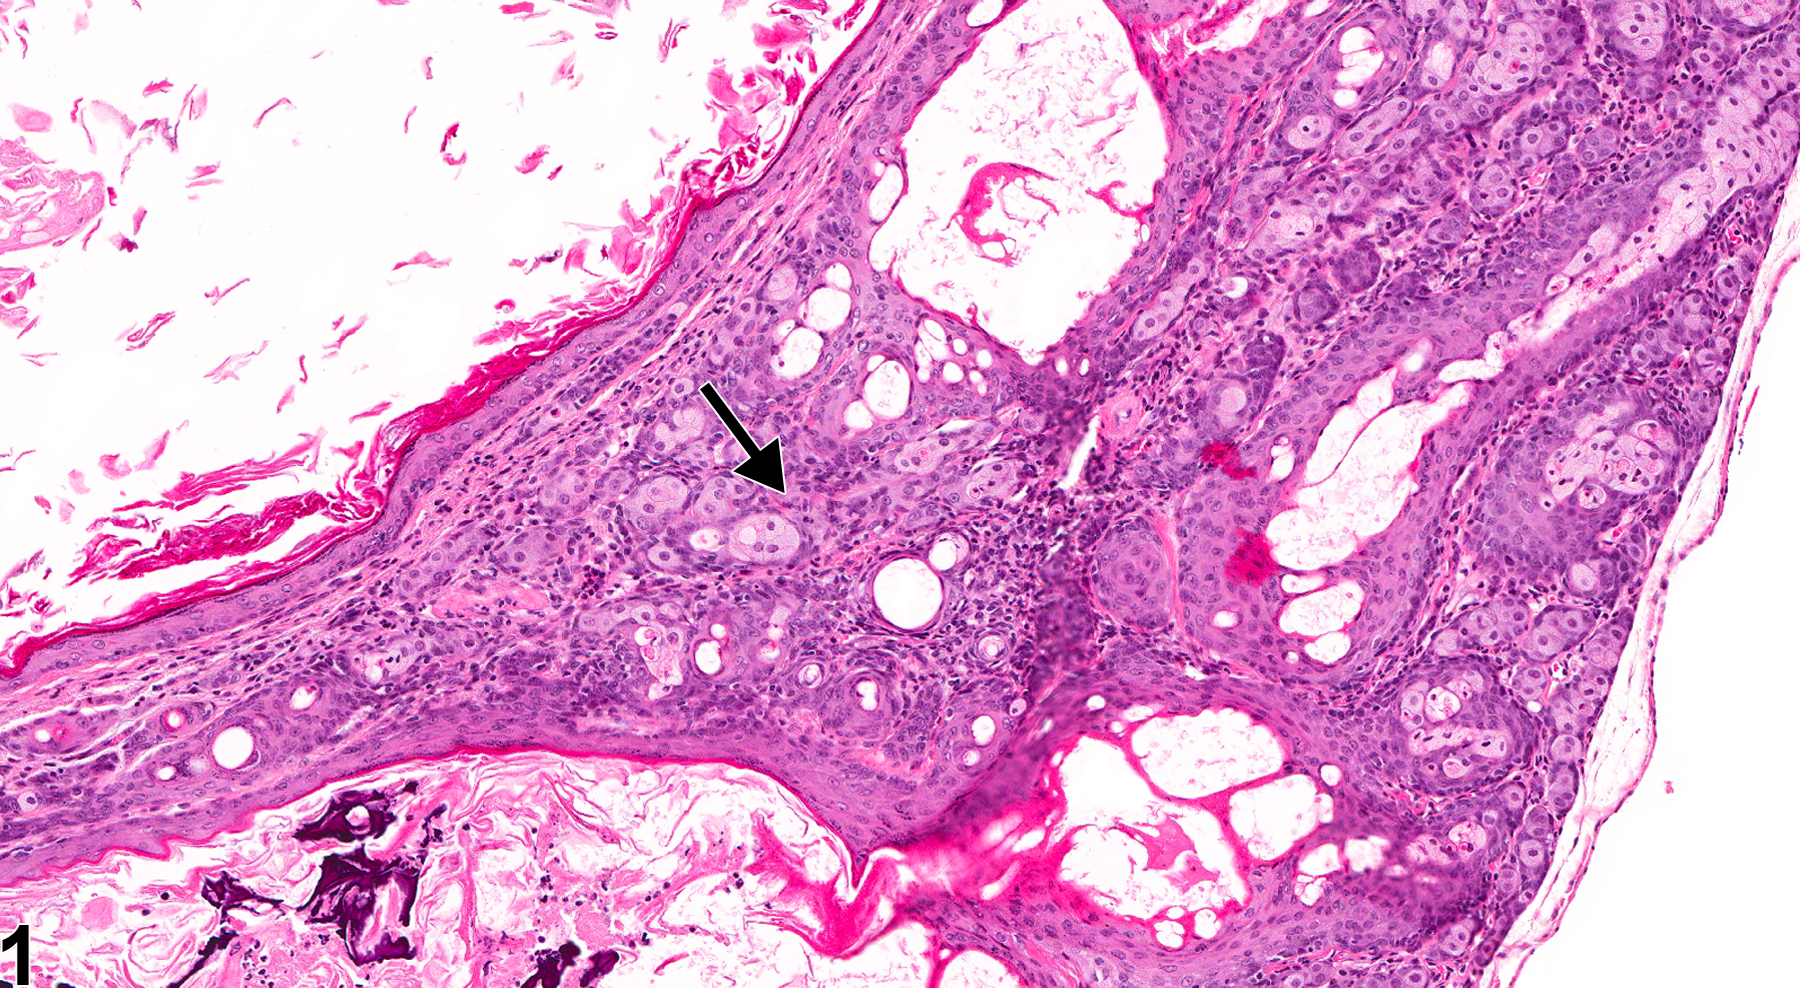 Image of inflammation in the Zymbal's gland from a male Tg.Ac (FVB/N) homozygous mouse in a subchronic study